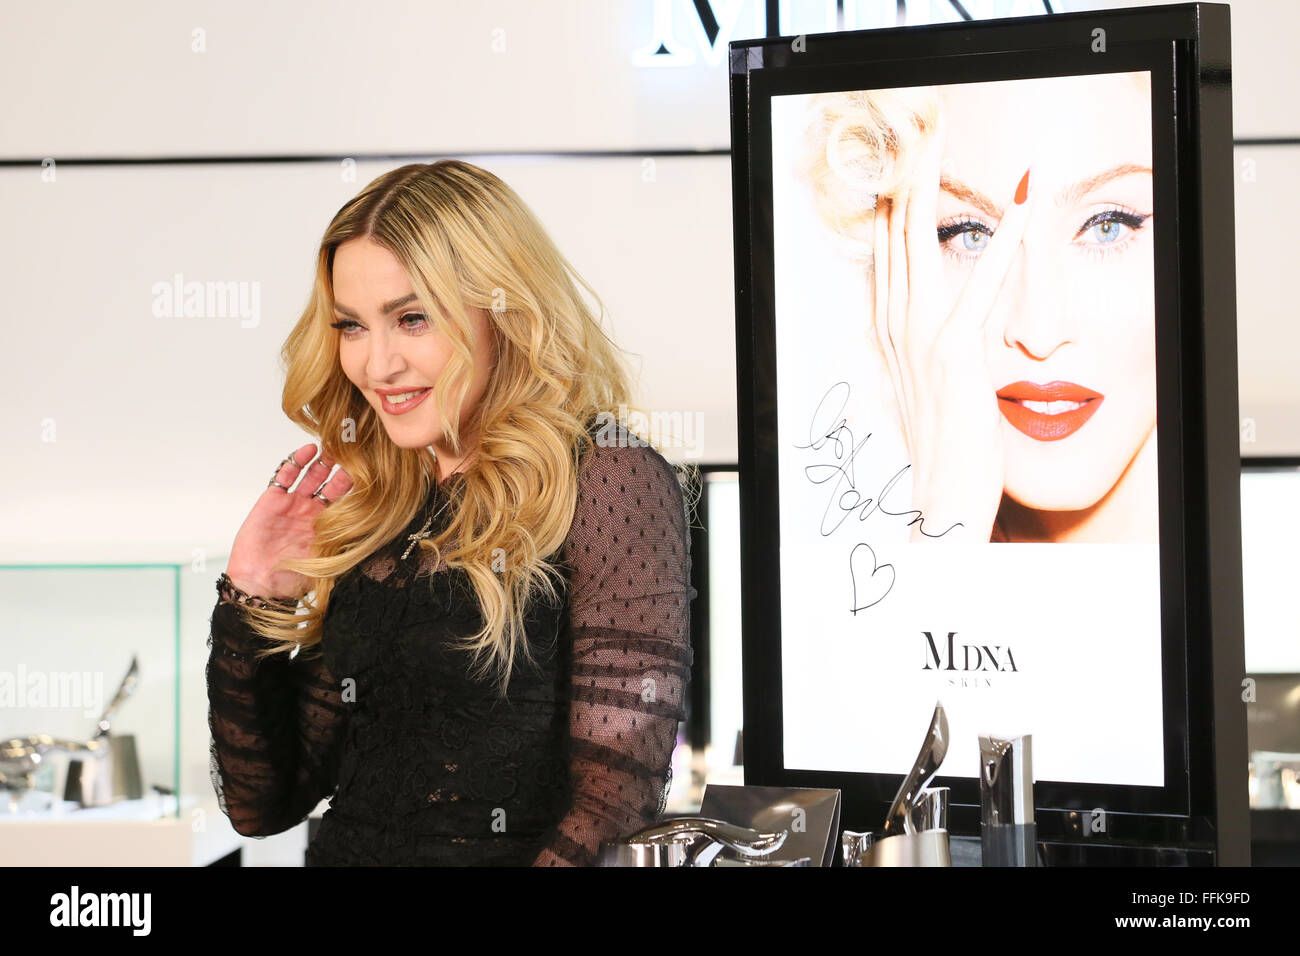 Madonna appears at Mitsukoshi Department store in Ginza to promote her cosmetic line MDNA Skin, on February 15, 2016 in Tokyo, Japan. The 57 year-old singer performed two consecutive nights at Saitama Super Arena over the weekend. Saturday's show started two hours late however, forcing some fans who had travelled from distance to leave even before the show began in order to catch the last train home. (Photo by Yohei Osada/AFLO) Stock Photo